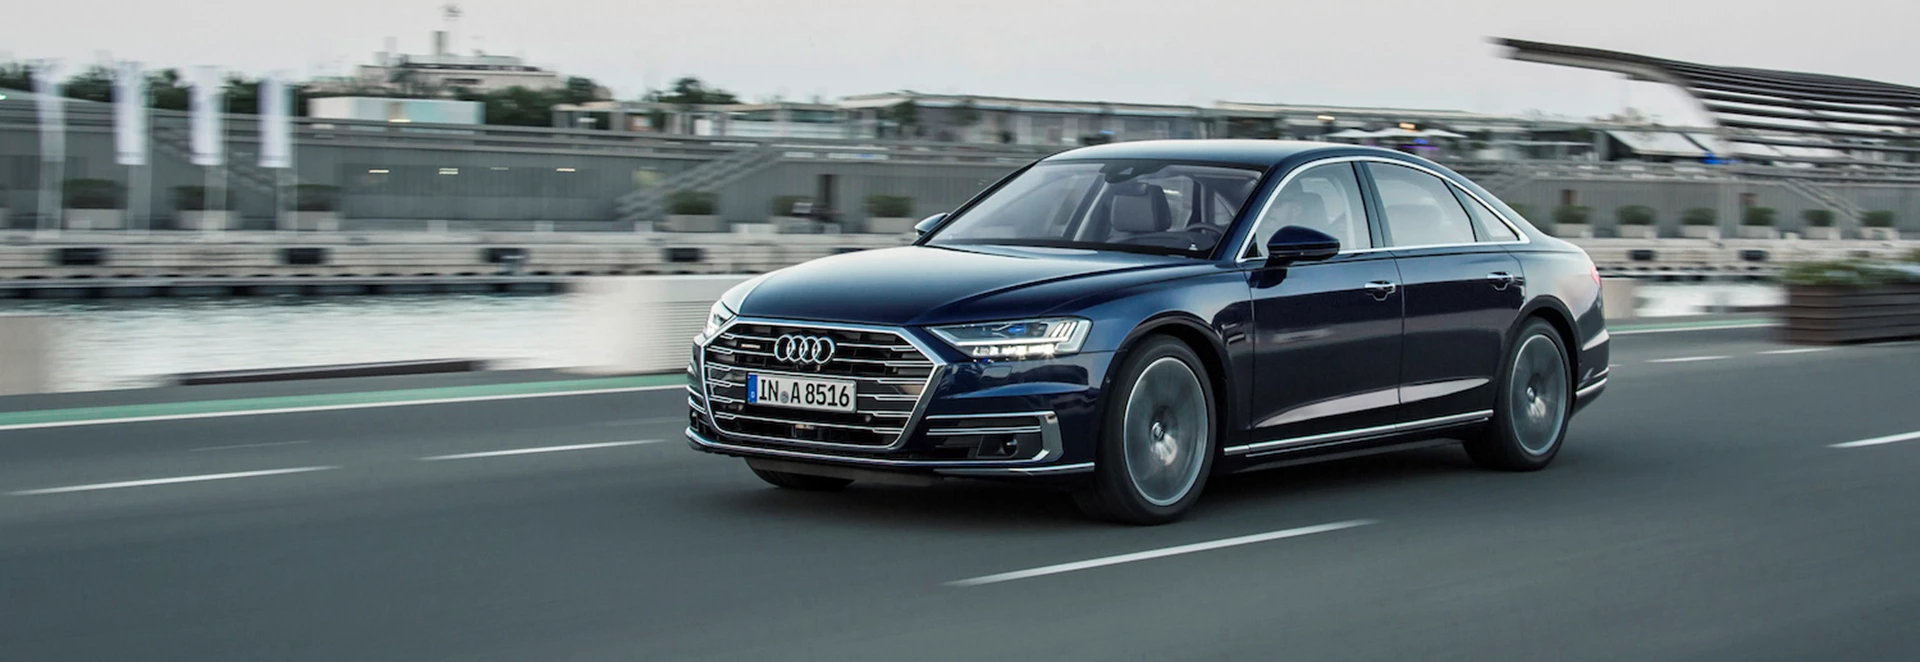 Why the Audi A8 is a bargain luxury car 